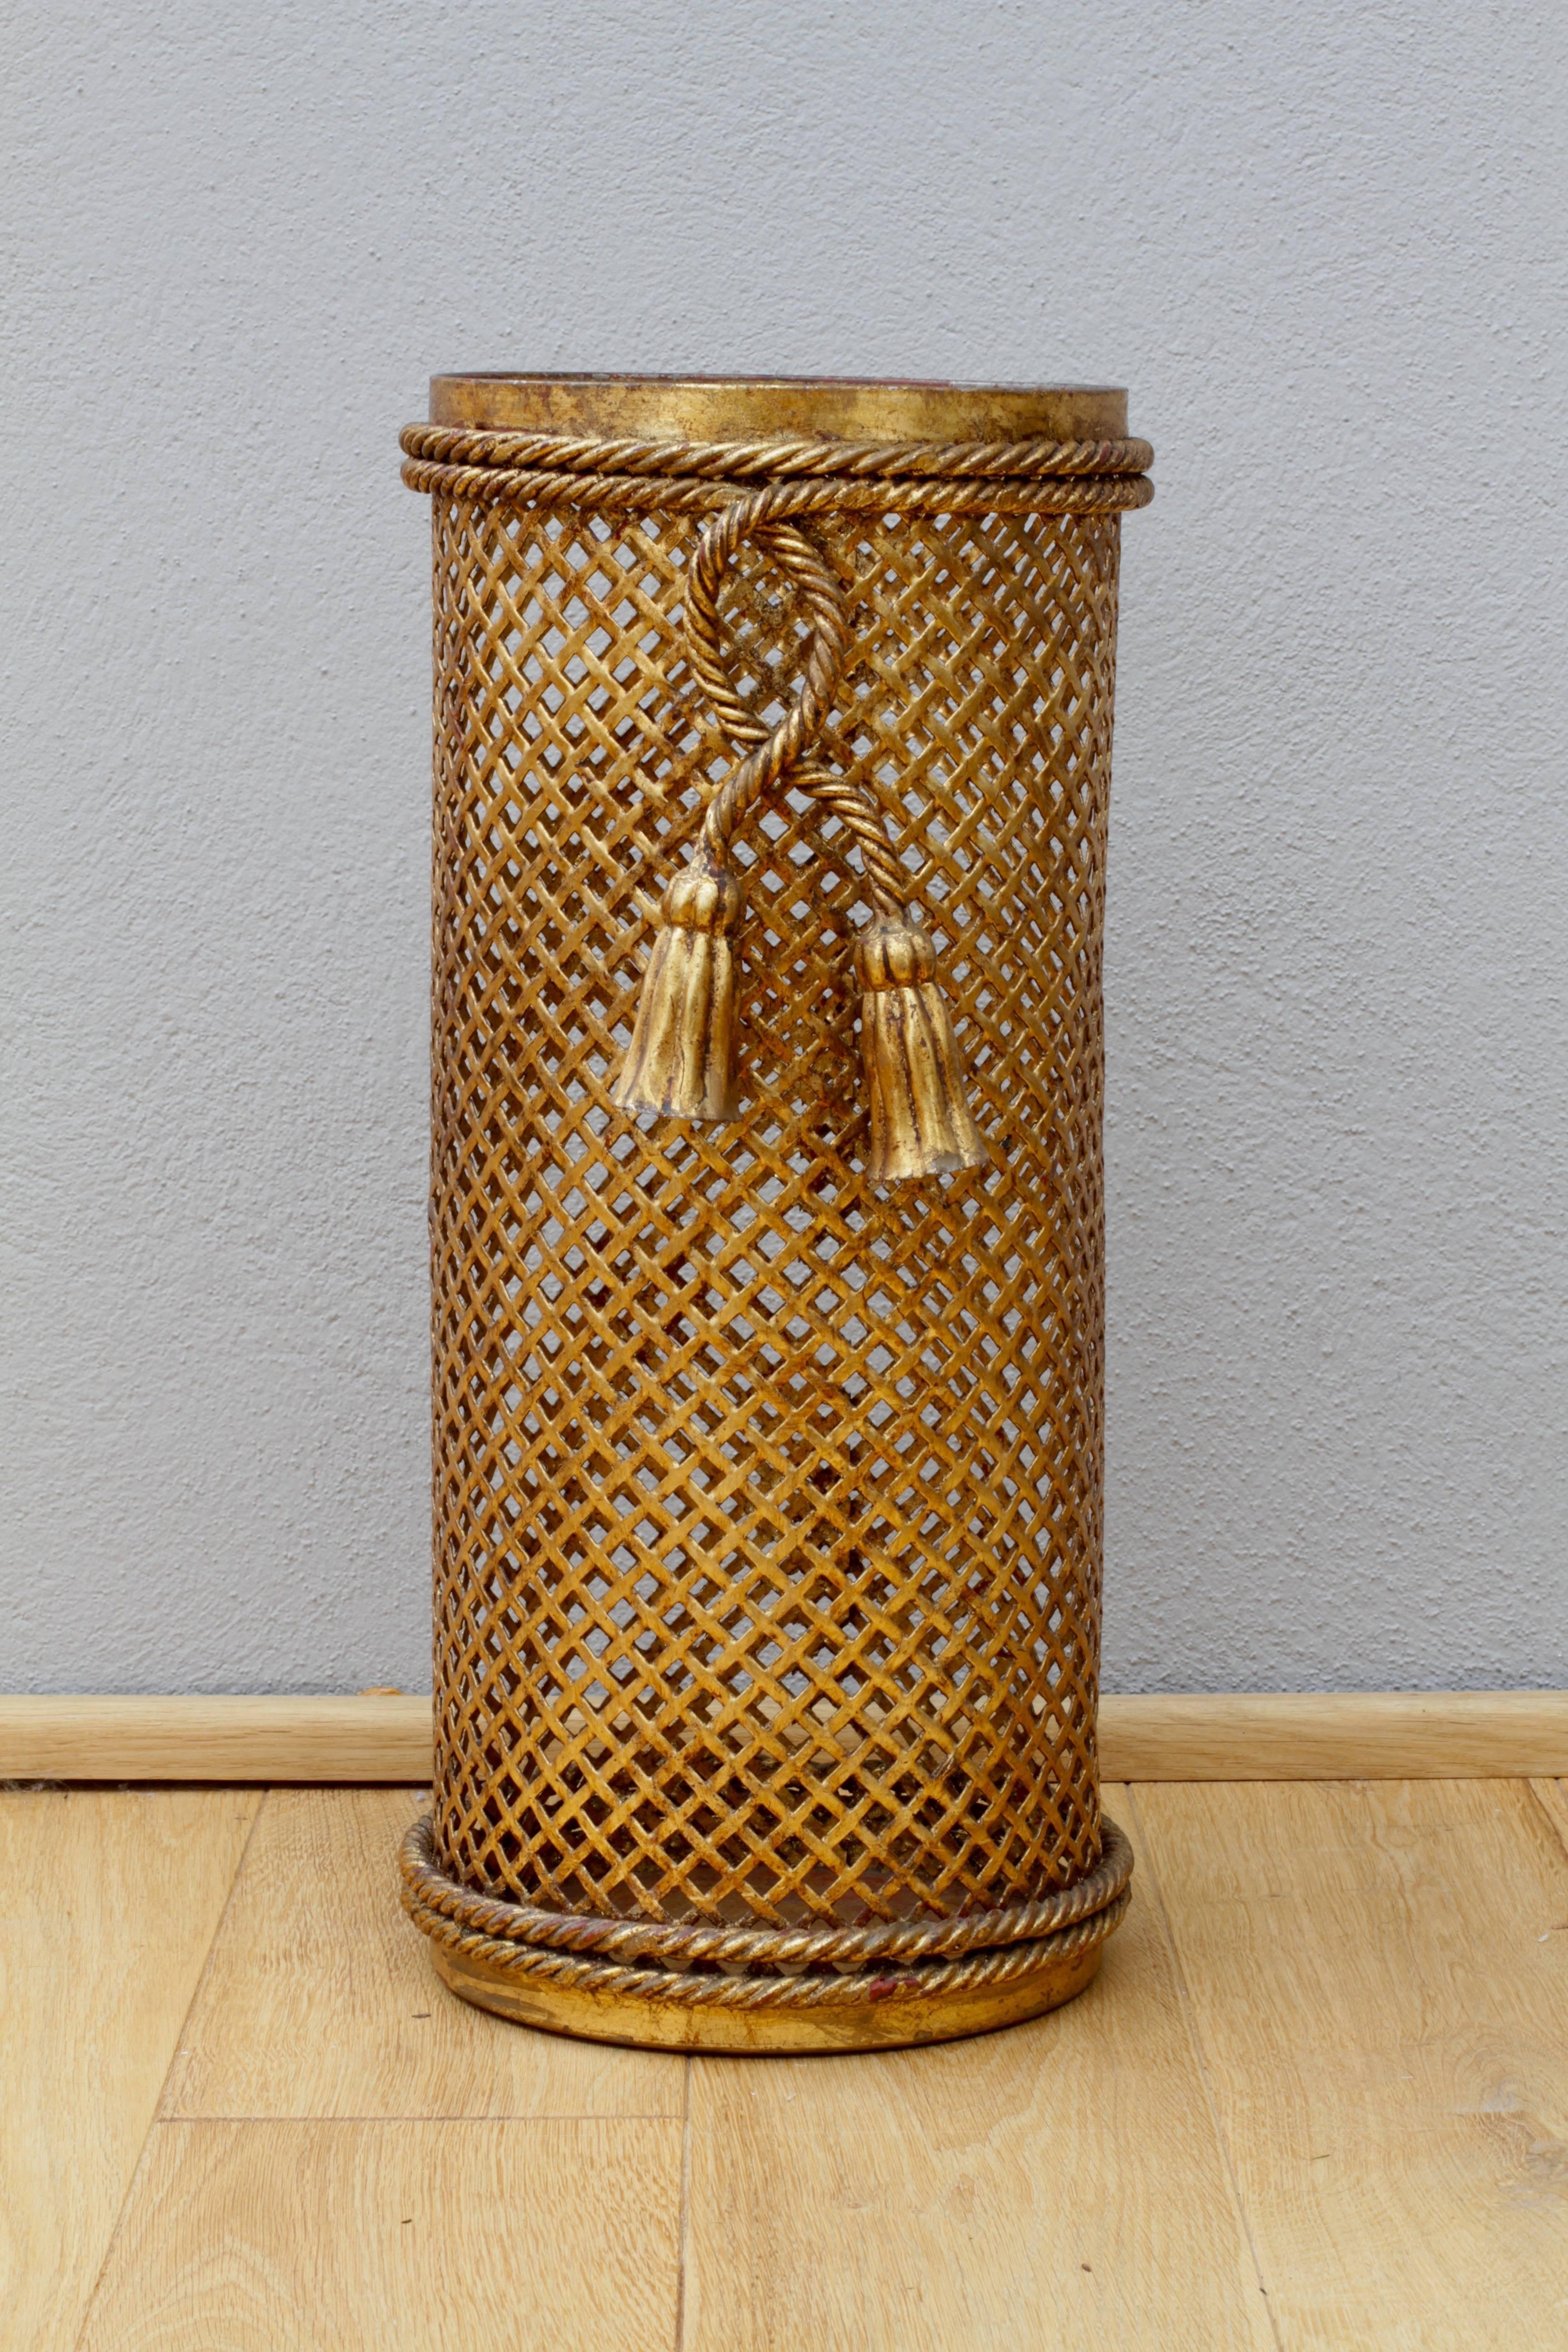 Stunning Mid-Century gold / gilt / gilded Hollywood Regency style umbrella stand / holder made in Florence, Italy, circa 1950 by Li Puma Firenze. The perforated lattice patterned metalwork with bent rope and tassel details finishes the piece